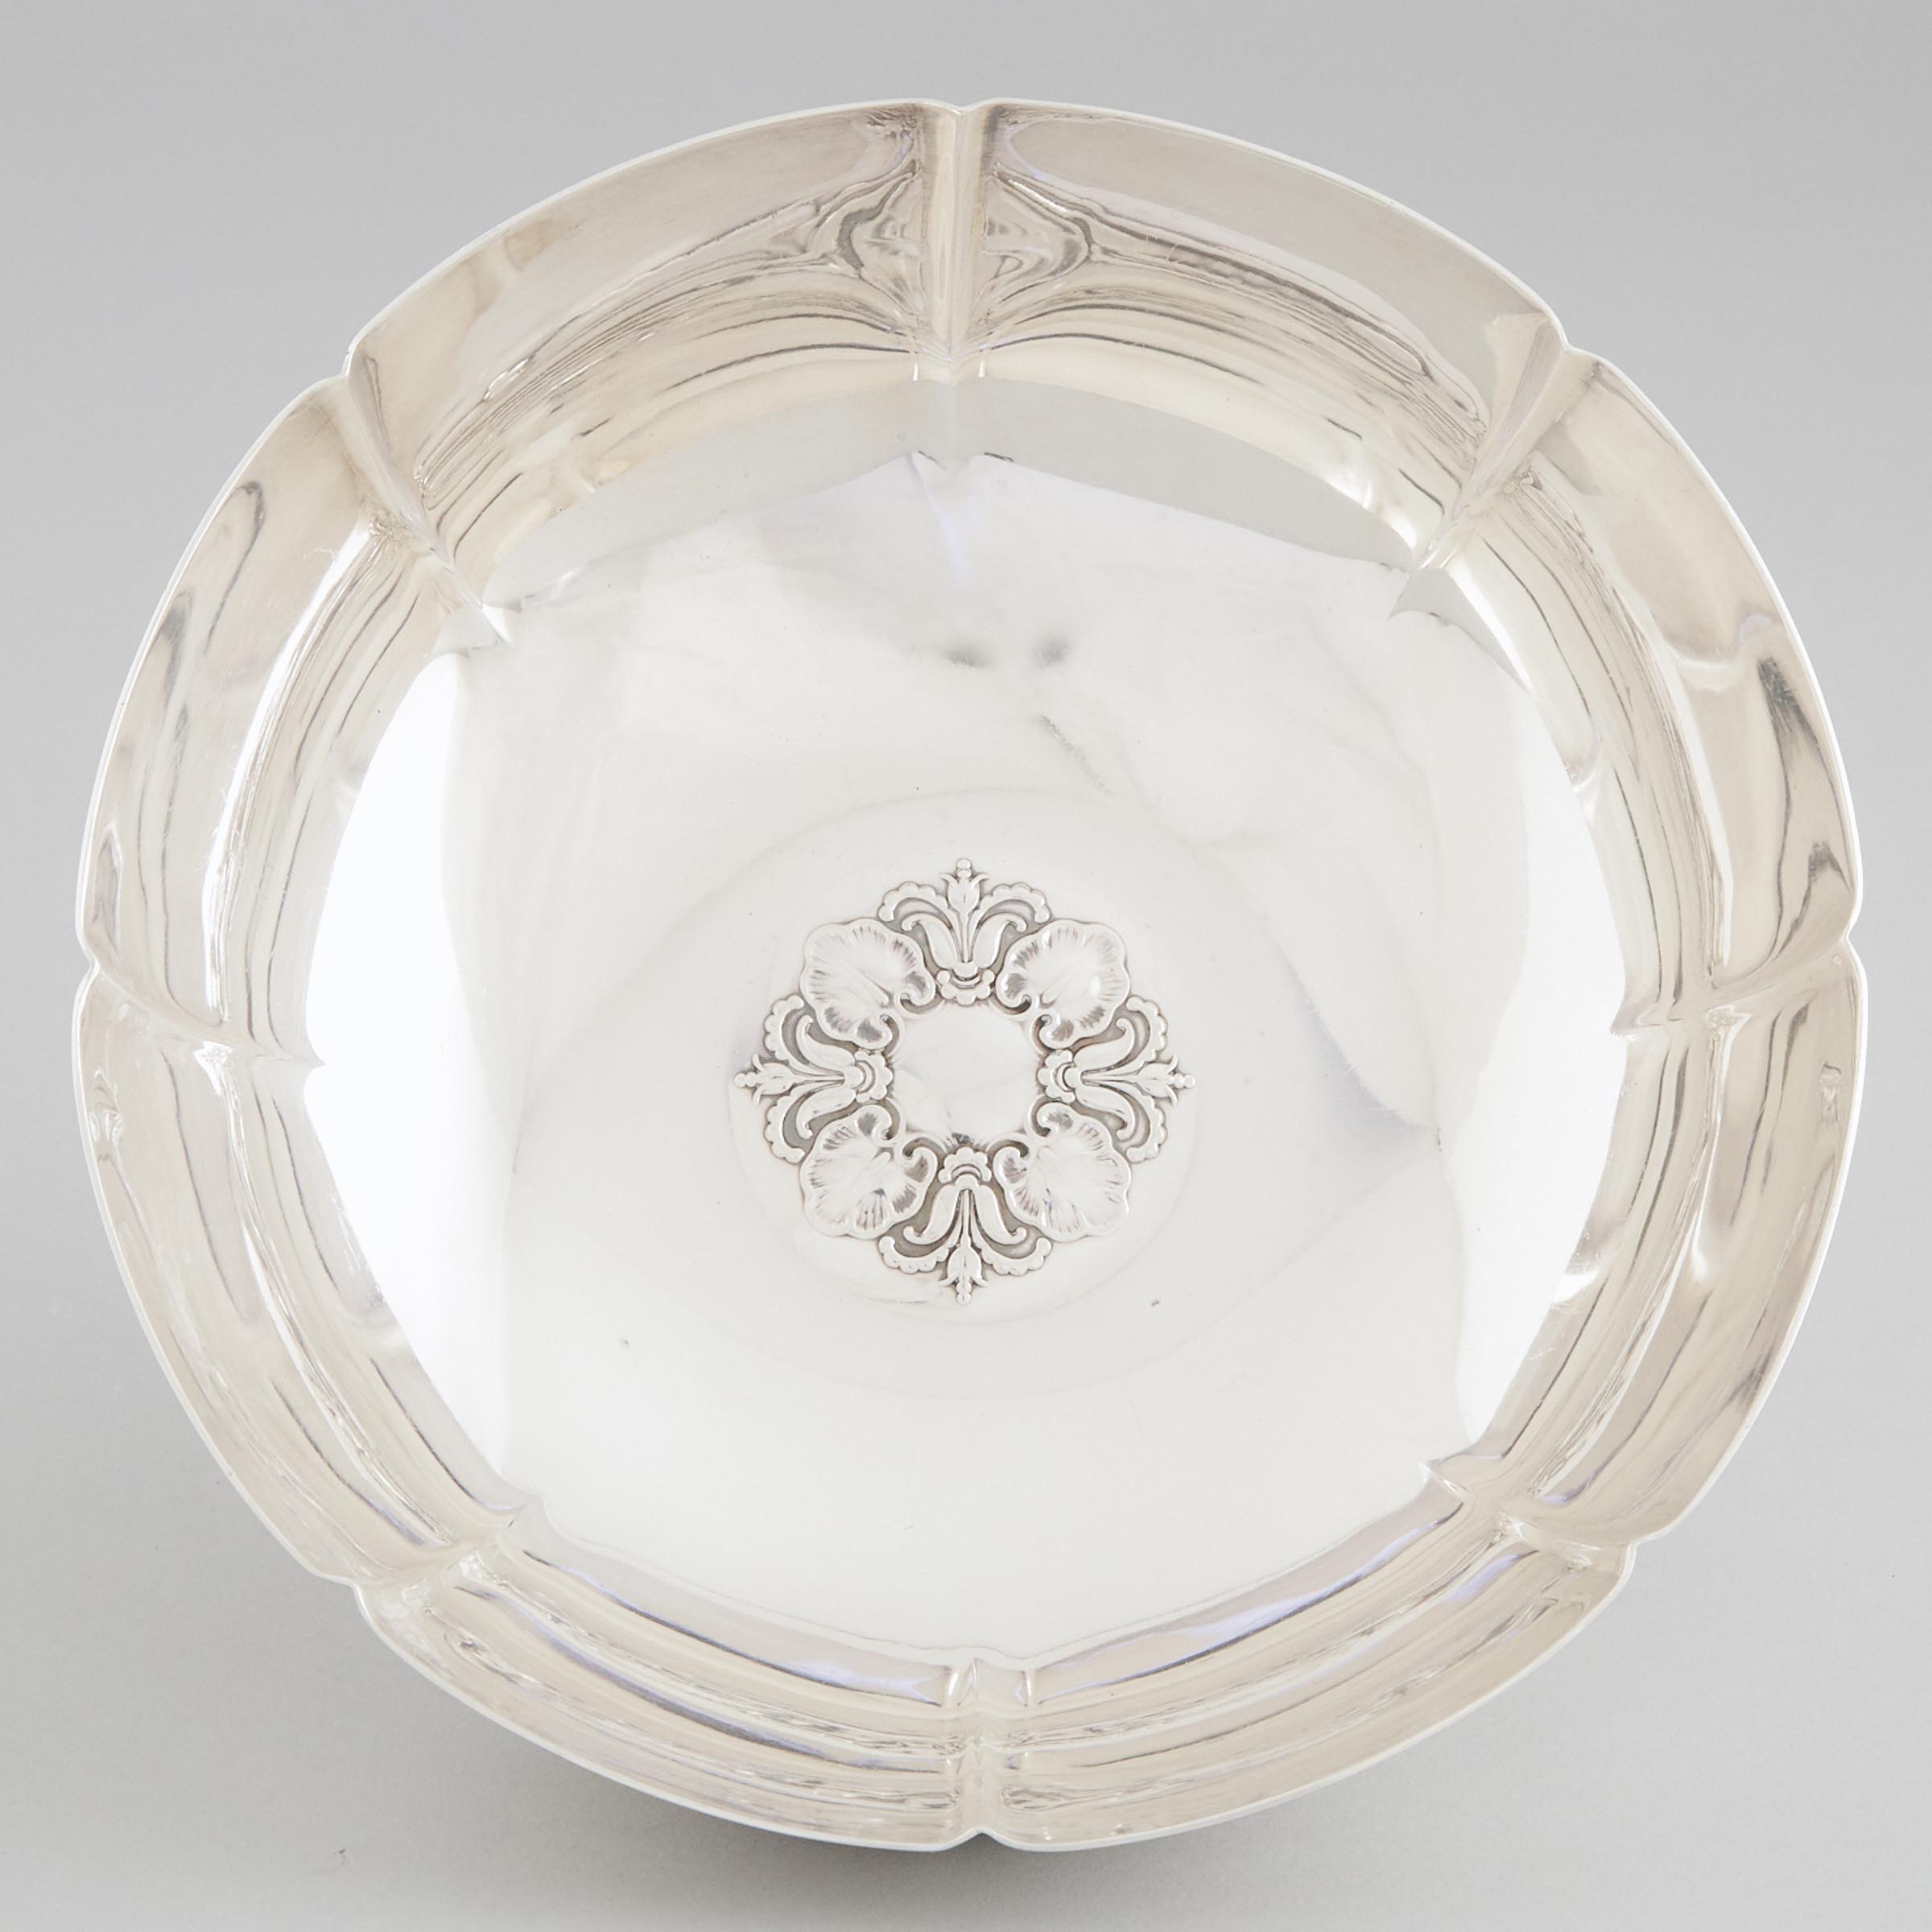 American Silver Footed Bowl, Charter Co., Wallingford, Ct., 20th century